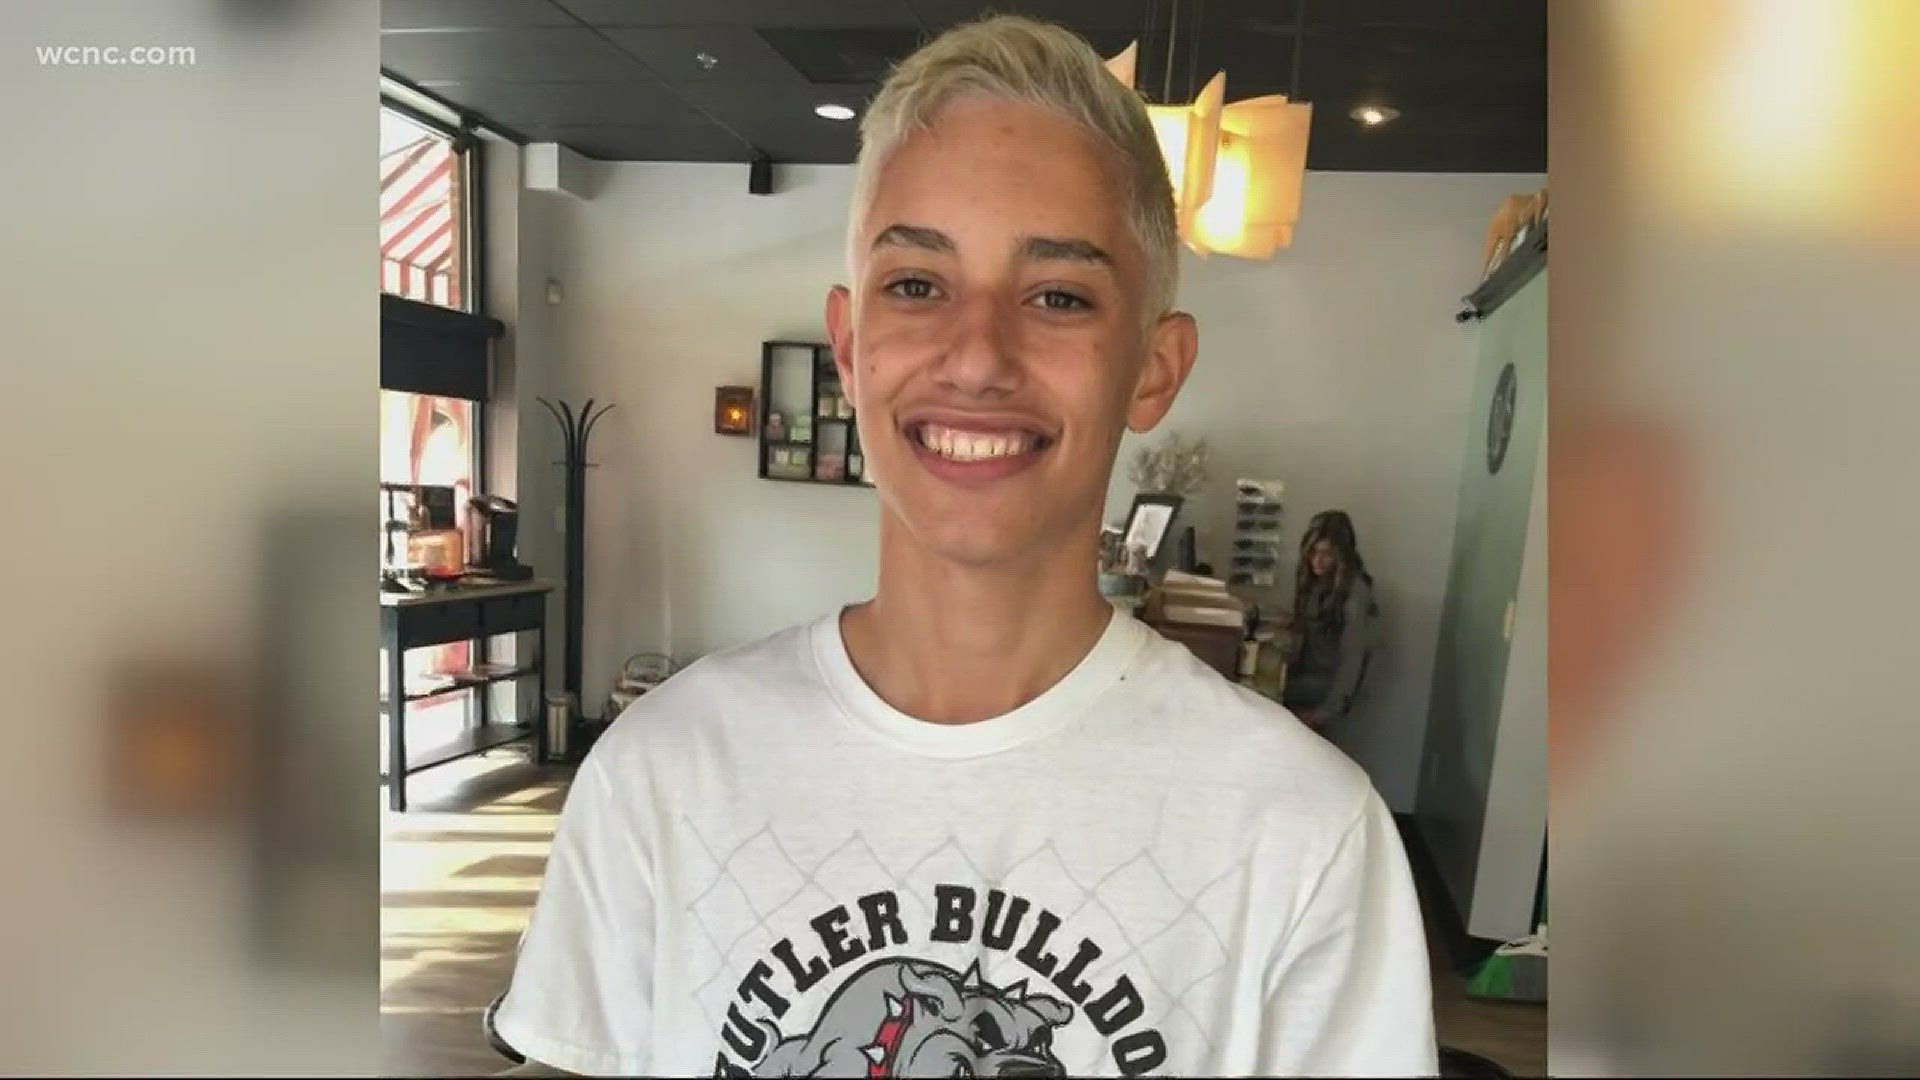 Six weeks after Hurricane Maria devastated Puerto Rico, 70 percent of people are still without power. However, a young teen is trying to make the most of his situation: finding new light and hope right here in the Charlotte area.